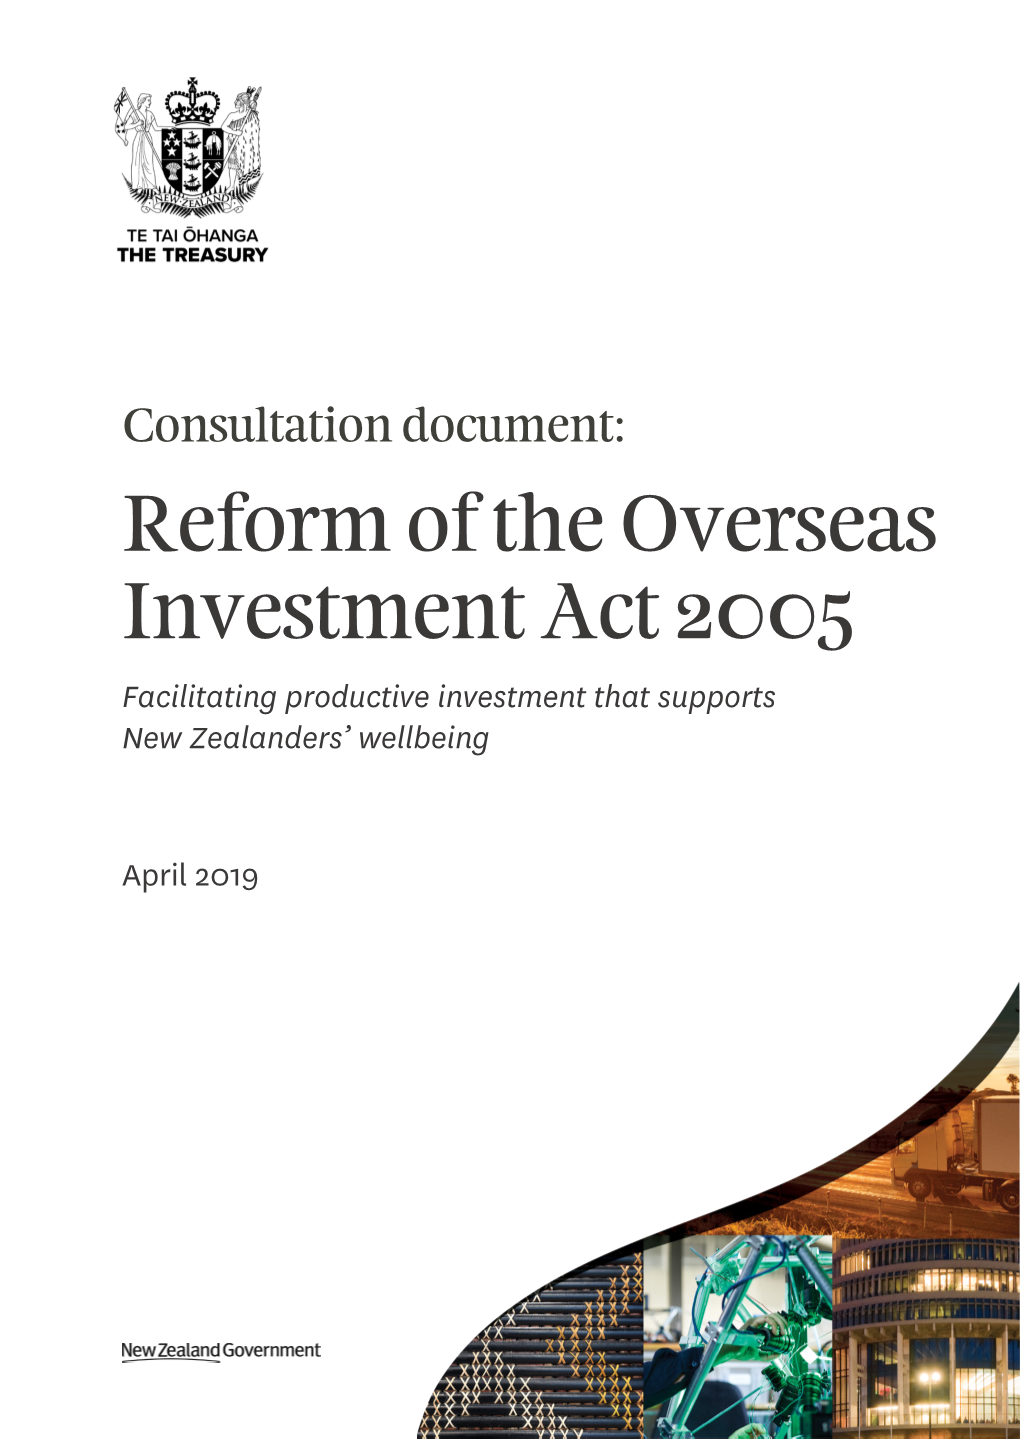 Consultation Document: Reform of the Overseas Investment Act 2005 Facilitating Productive Investment That Supports New Zealanders’ Wellbeing